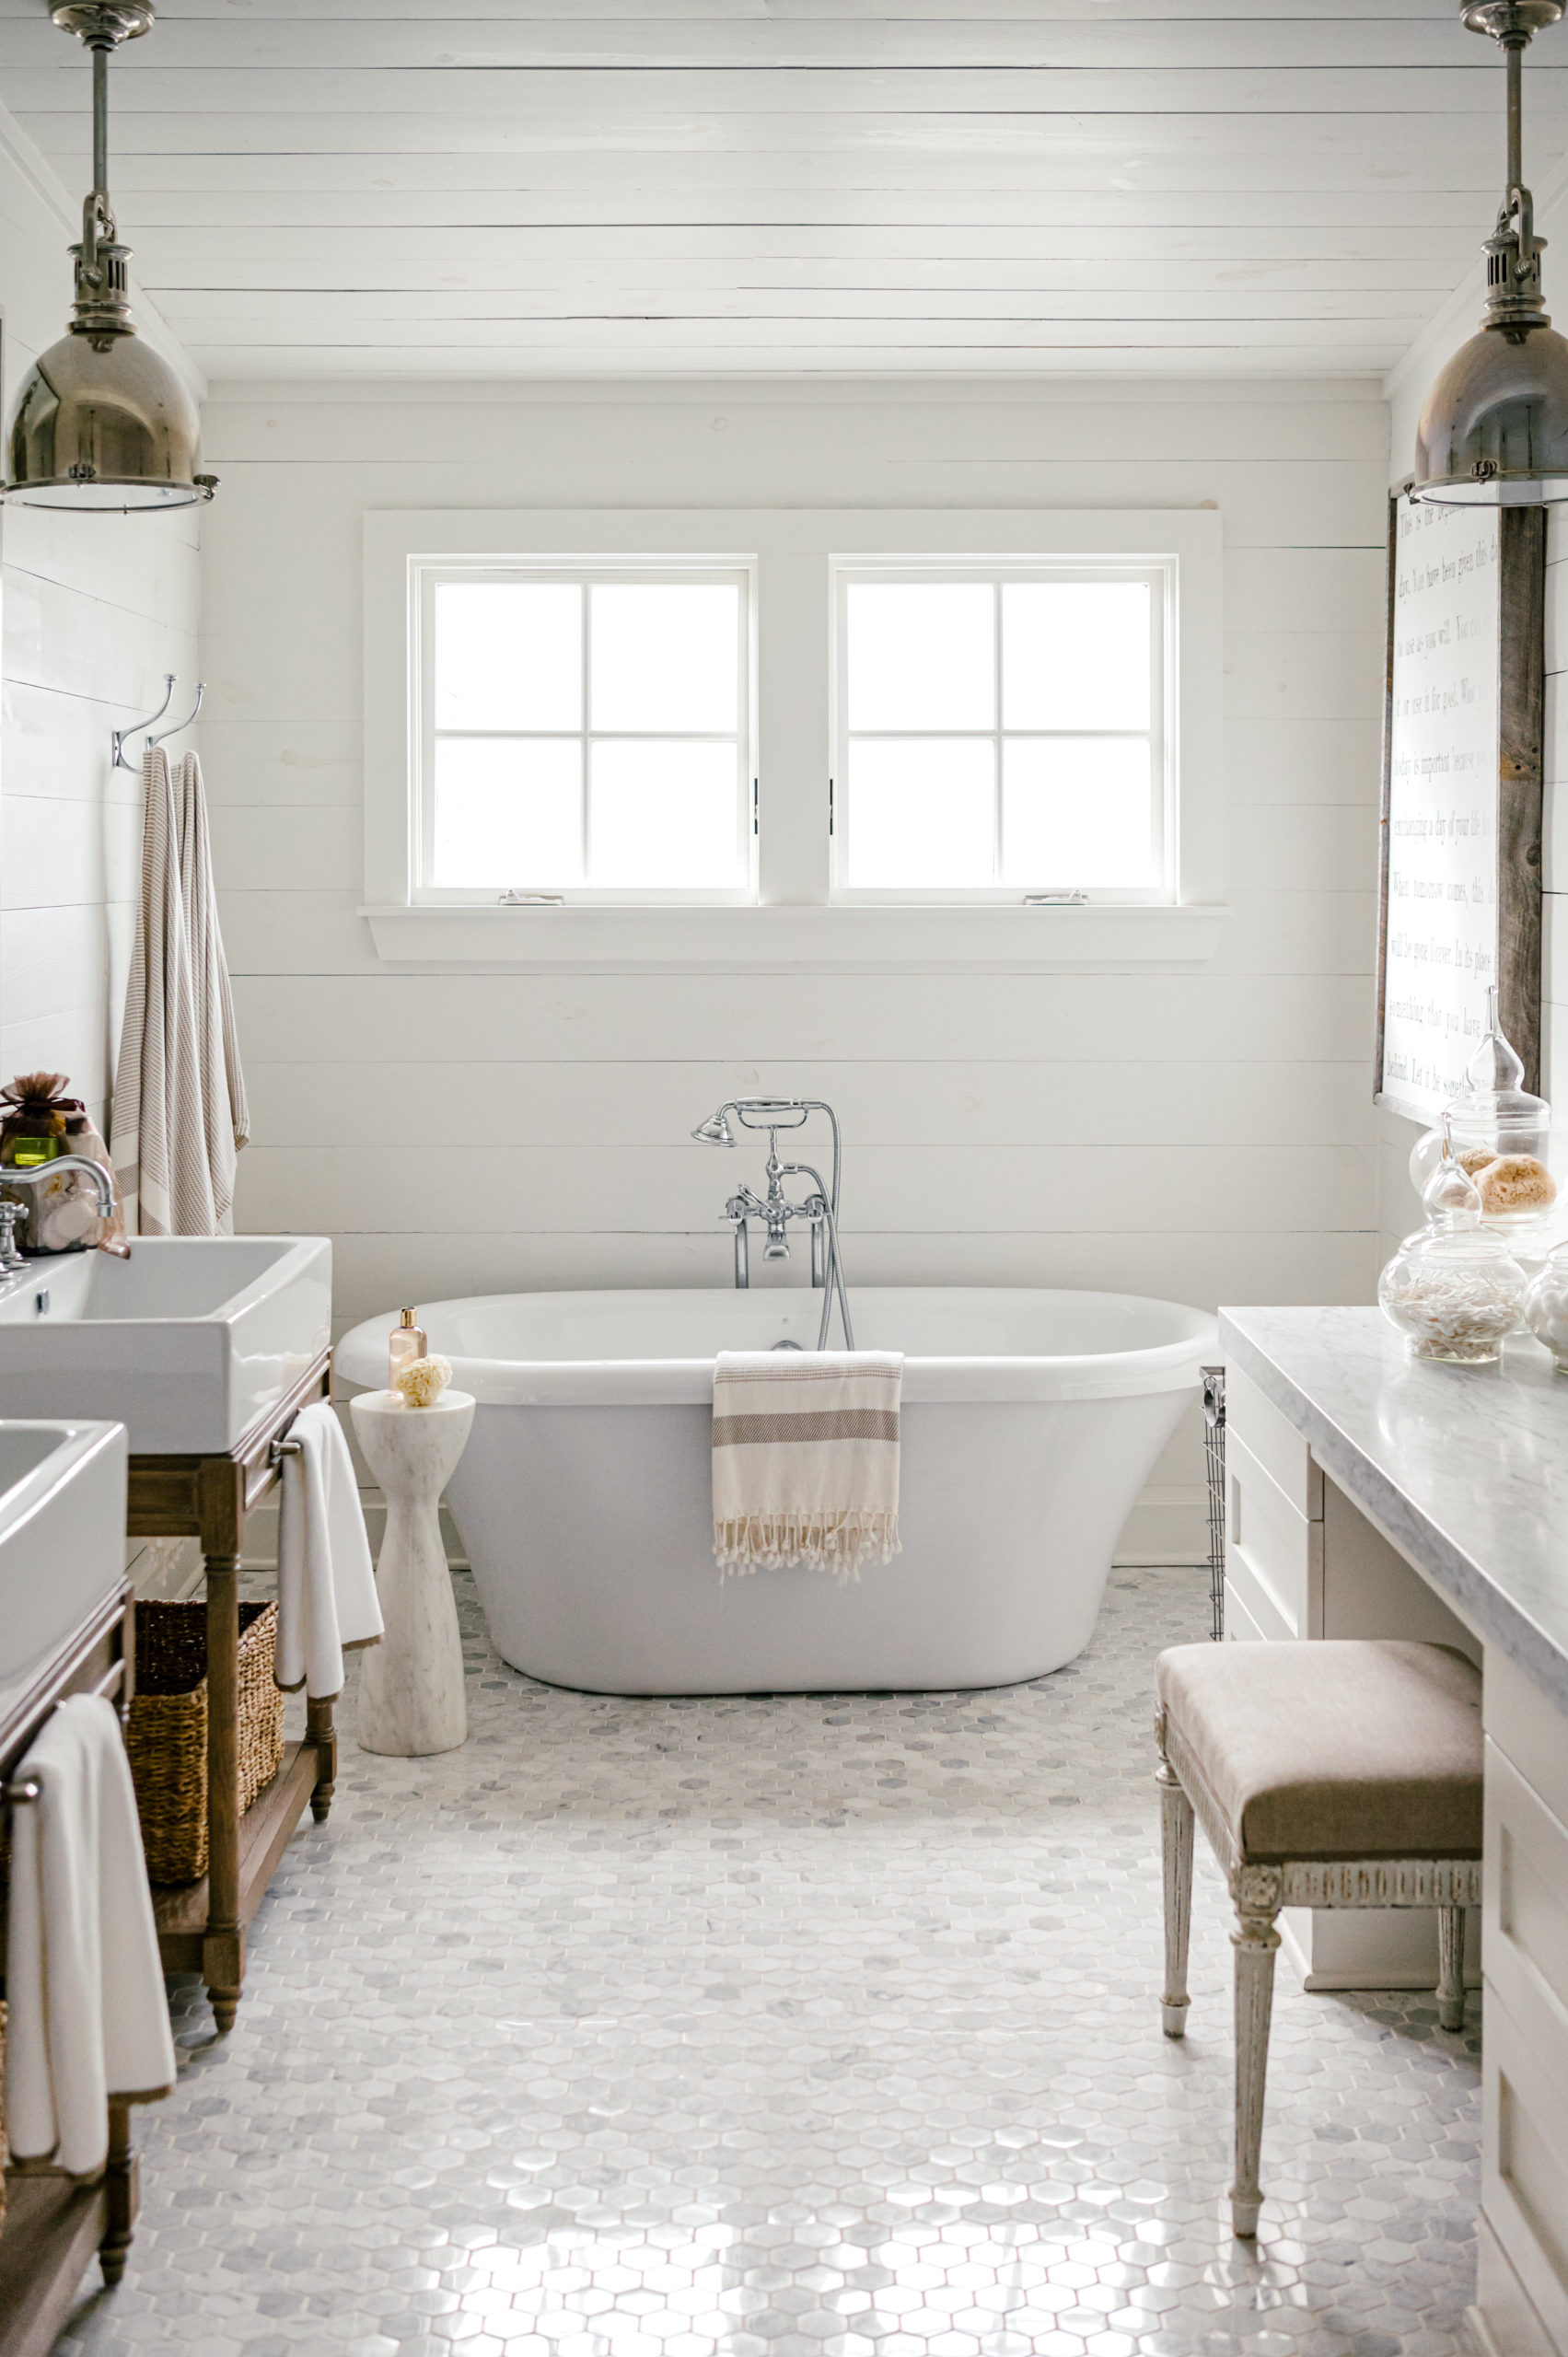 Bathroom interior of a short-term vacation rental with a white bathtub and sinks